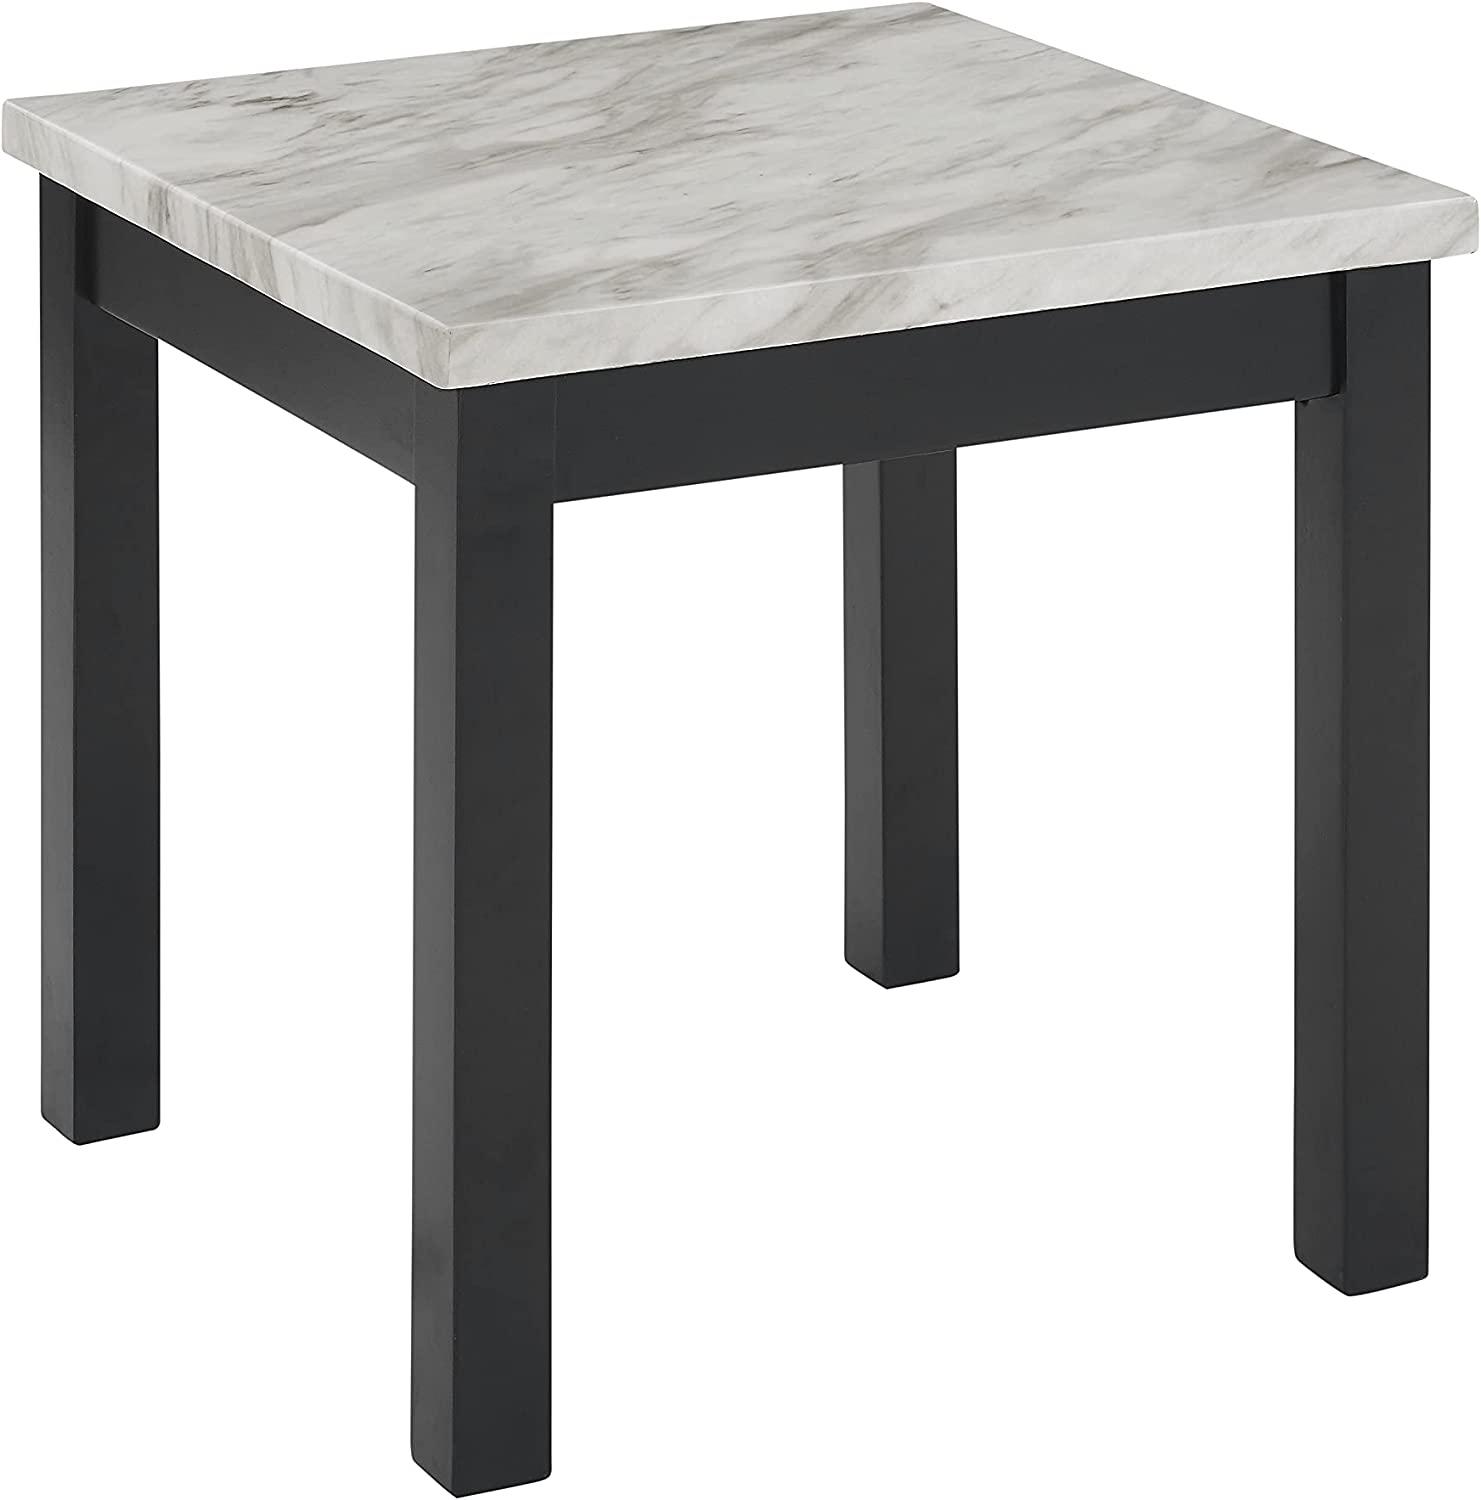 Faux Marble 3 Piece Table set with 2 ends and one lift top coffee table